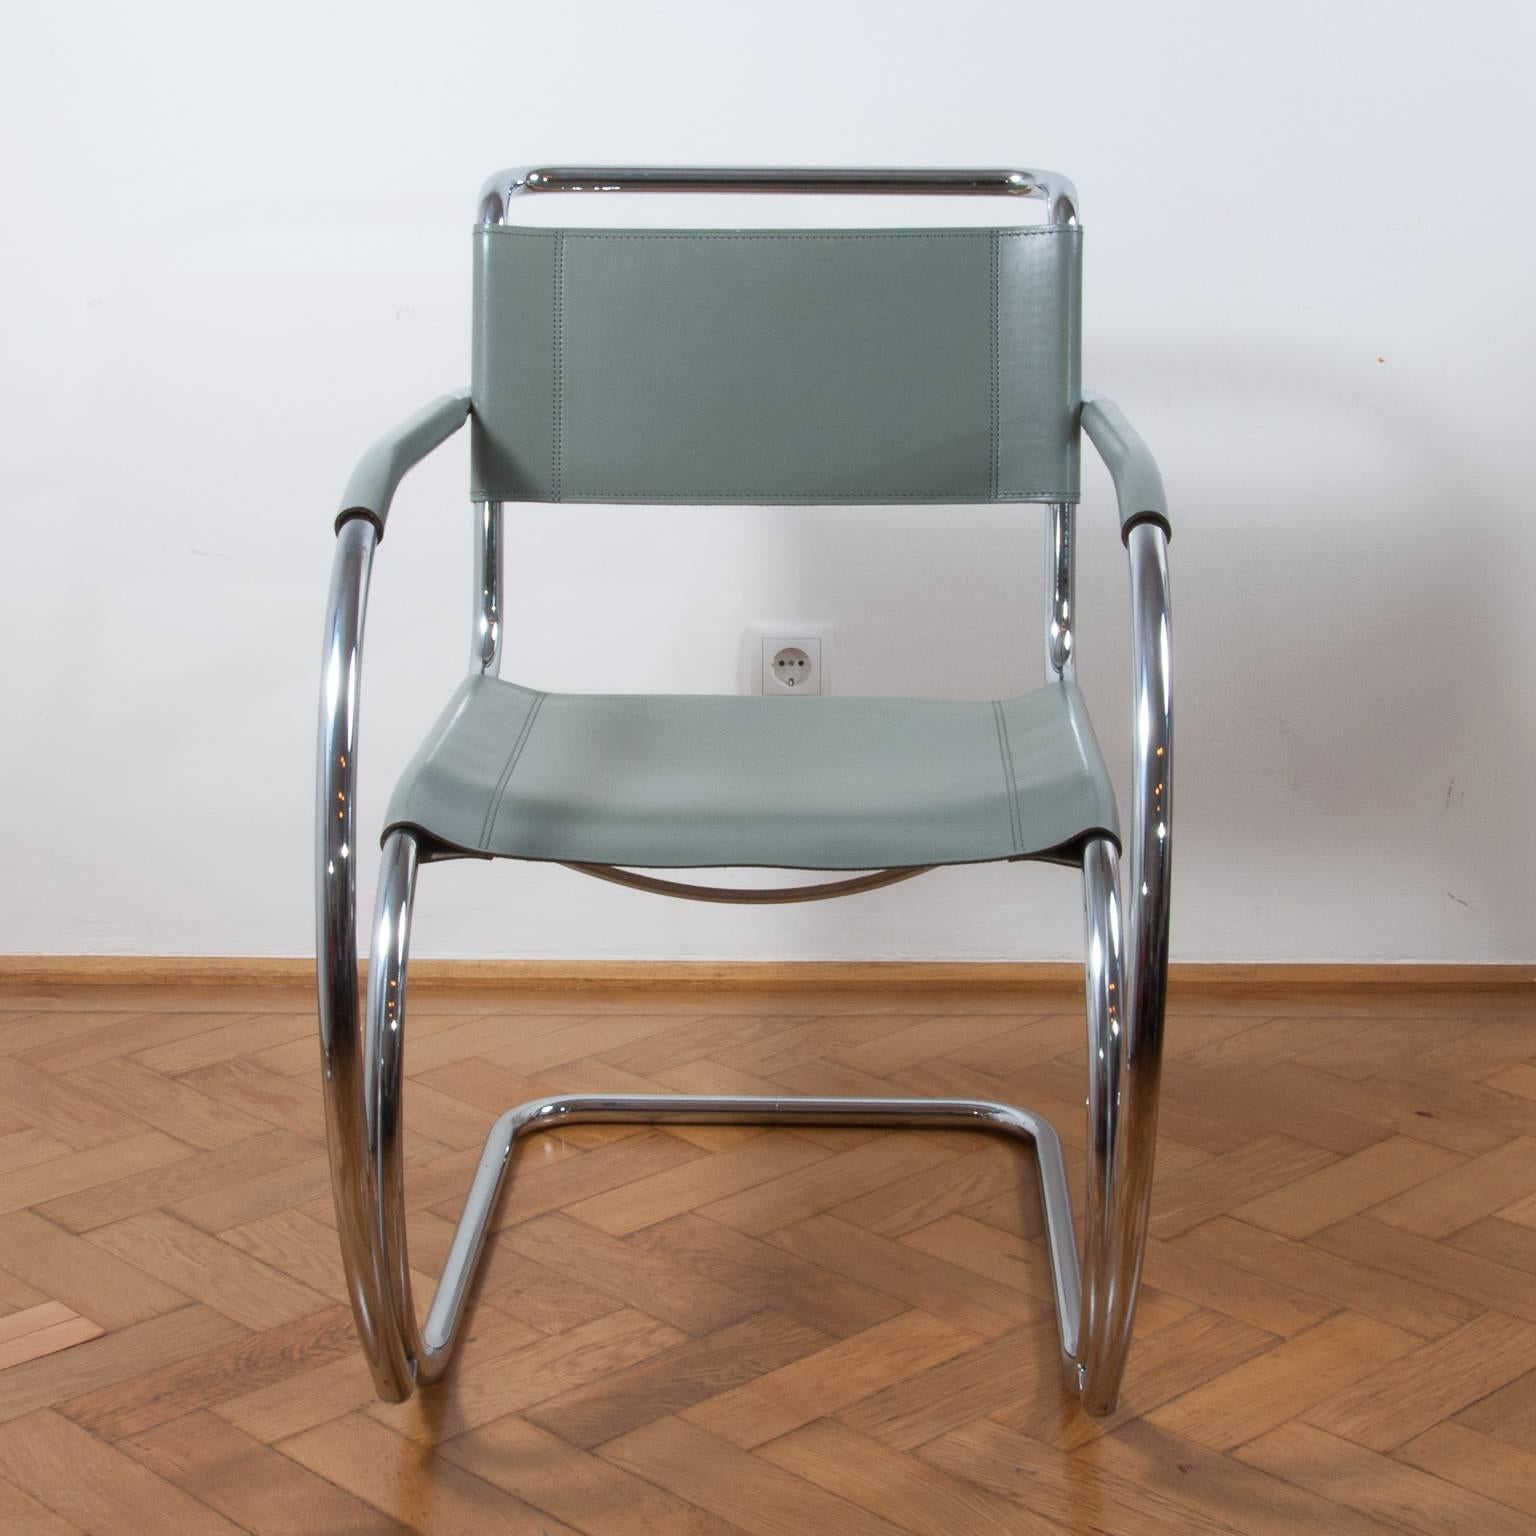 A wonderful example of an iconic S533 Cantilever chair originally designed in 1927 by Ludwig Mies van der Rohe for Thonet.
His design combines functionality and comfort with timeless aesthetics. The chair was first presented in the Weissenhof Estate